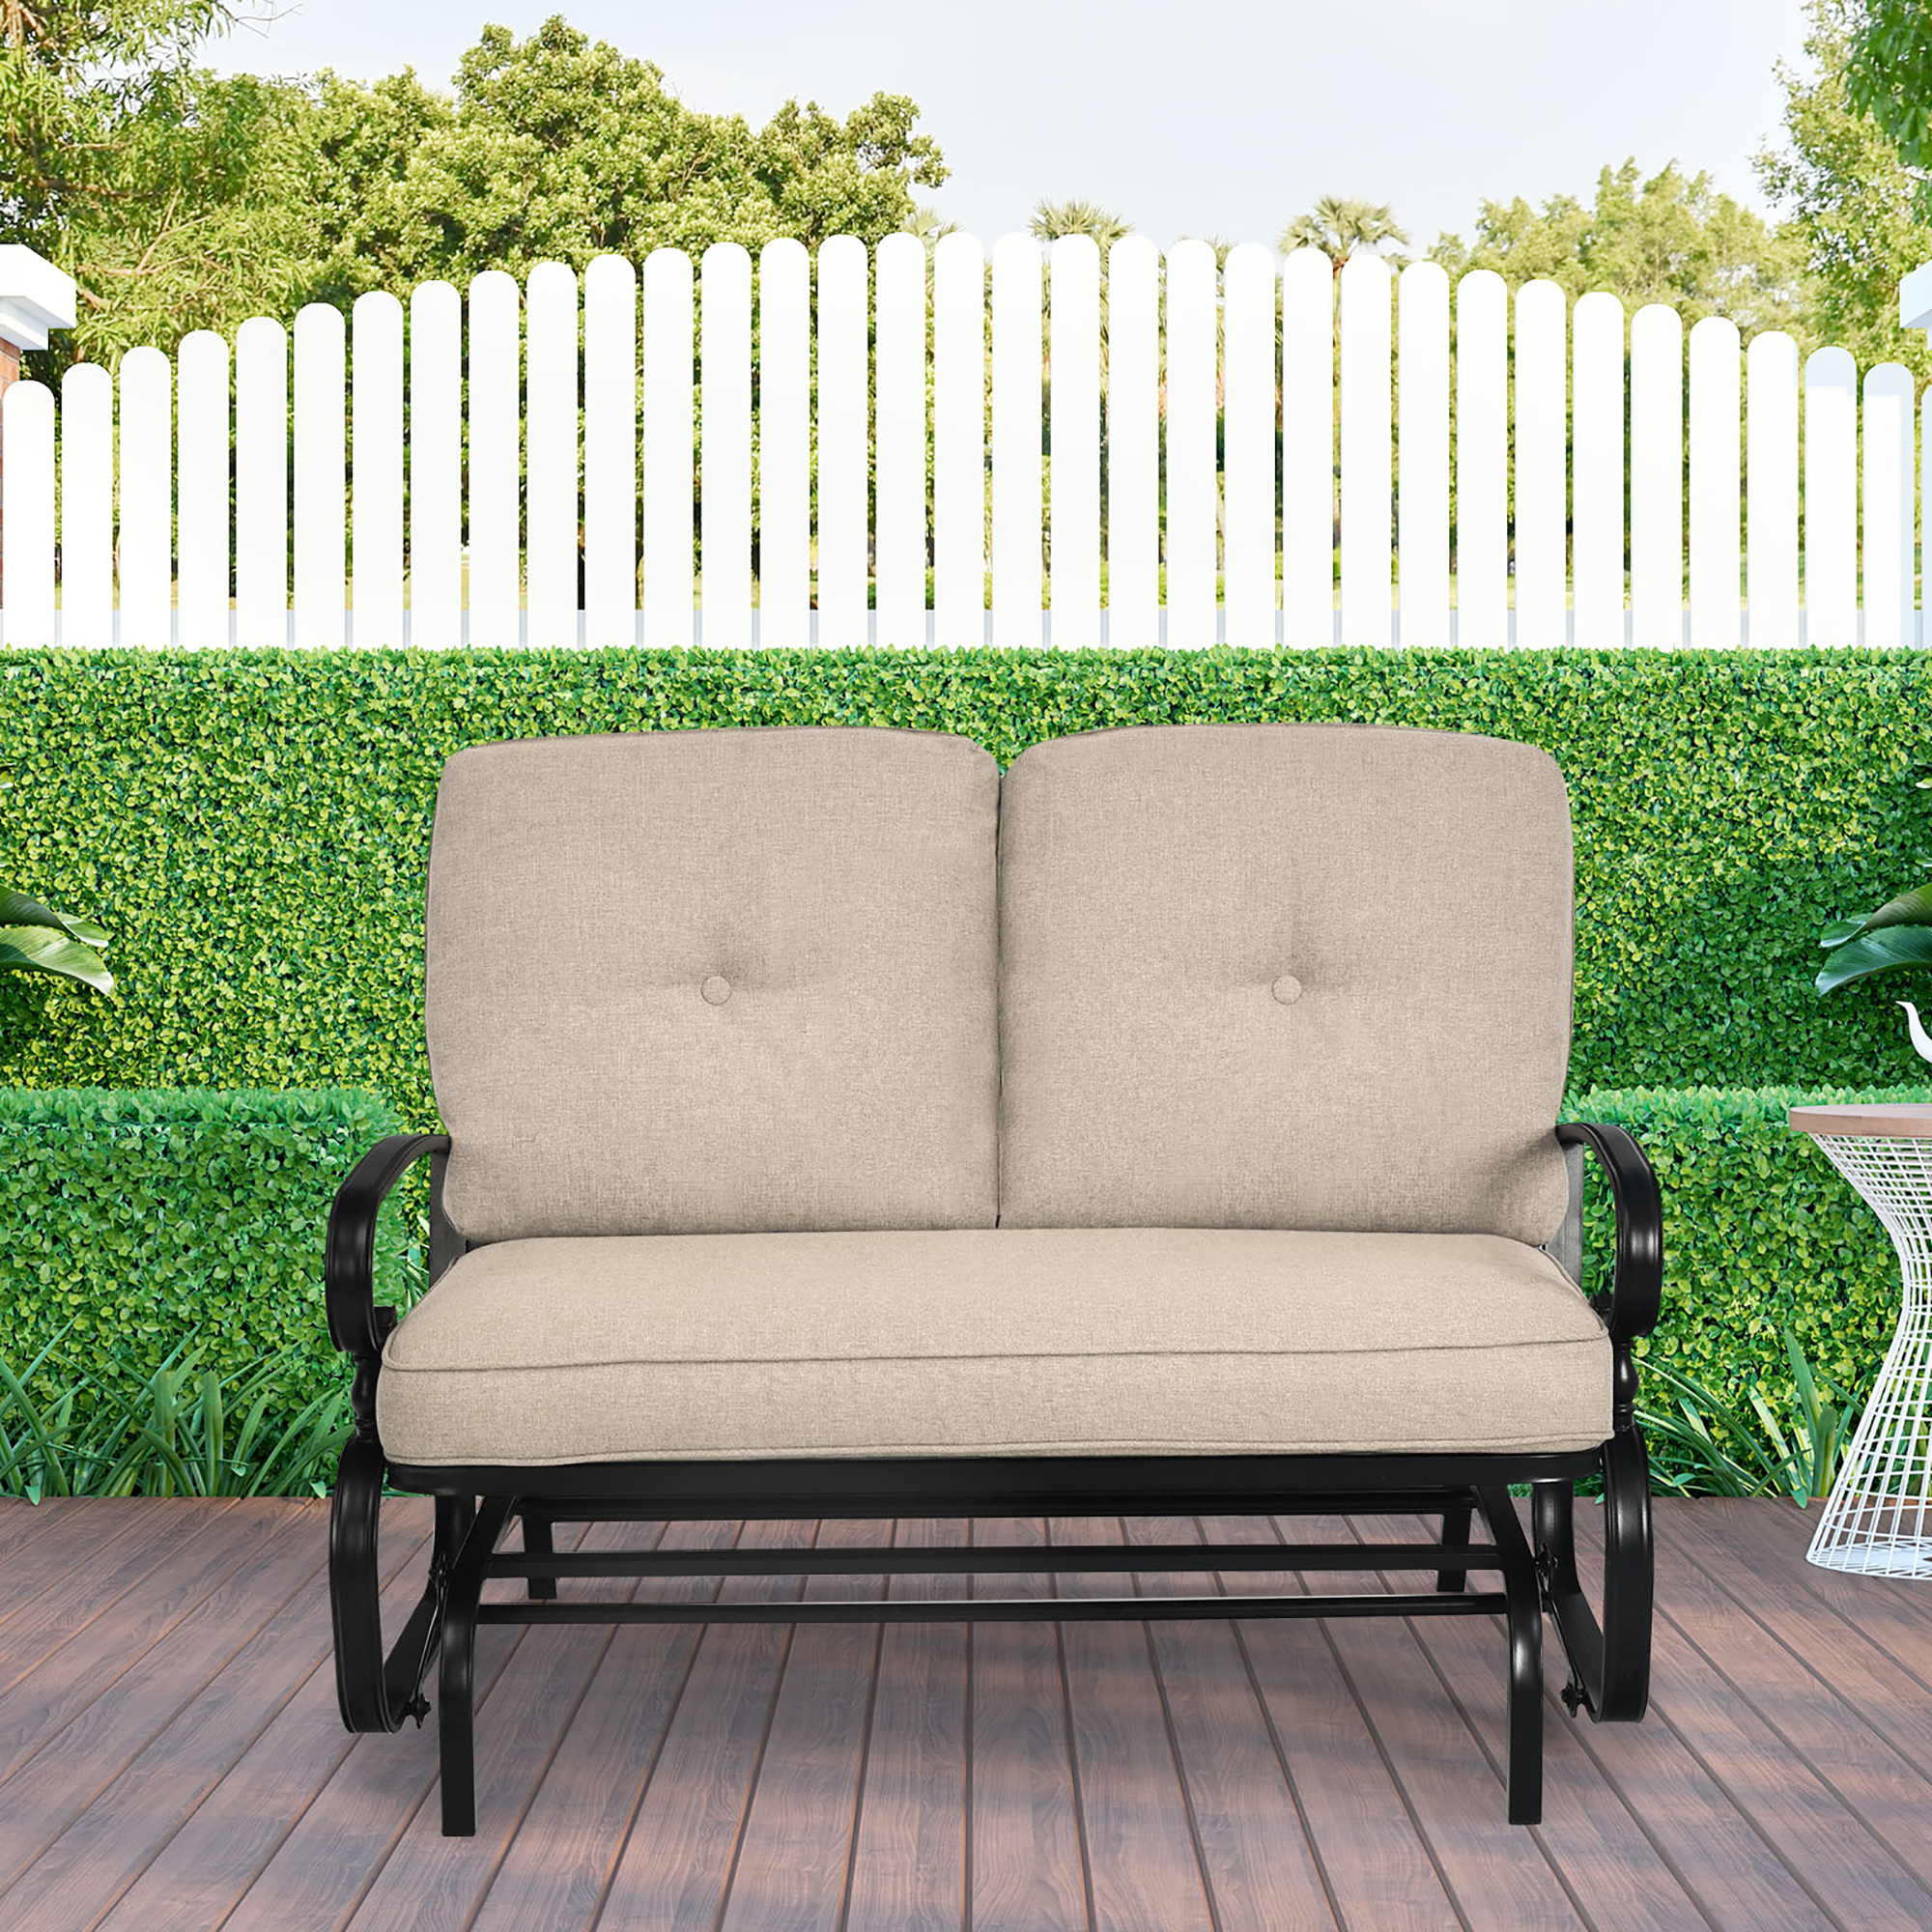 Costway 2-Person Outdoor Swing Glider Chair Bench Loveseat Cushioned Sofa - image 3 of 10